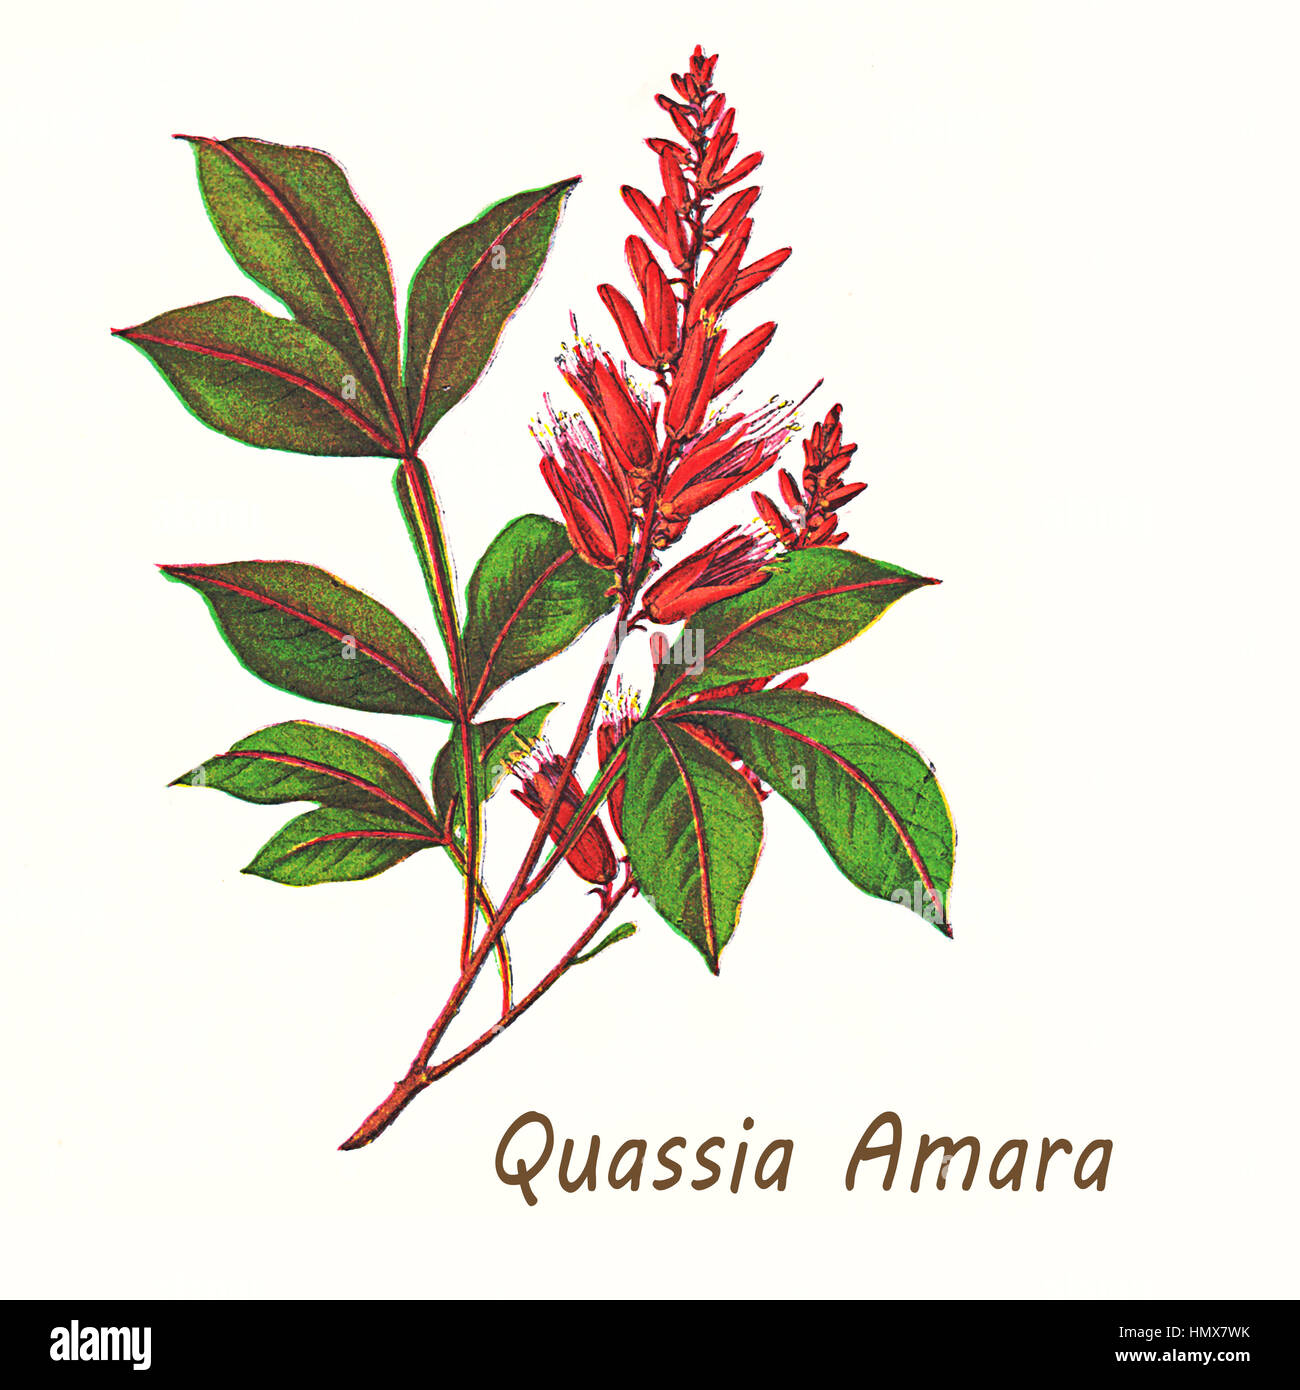 Vintage illustration of quassia amara, shrub with bright red flowers used as insecticide, in traditional medicine and as additive in the food industry for its bitter taste. Stock Photo